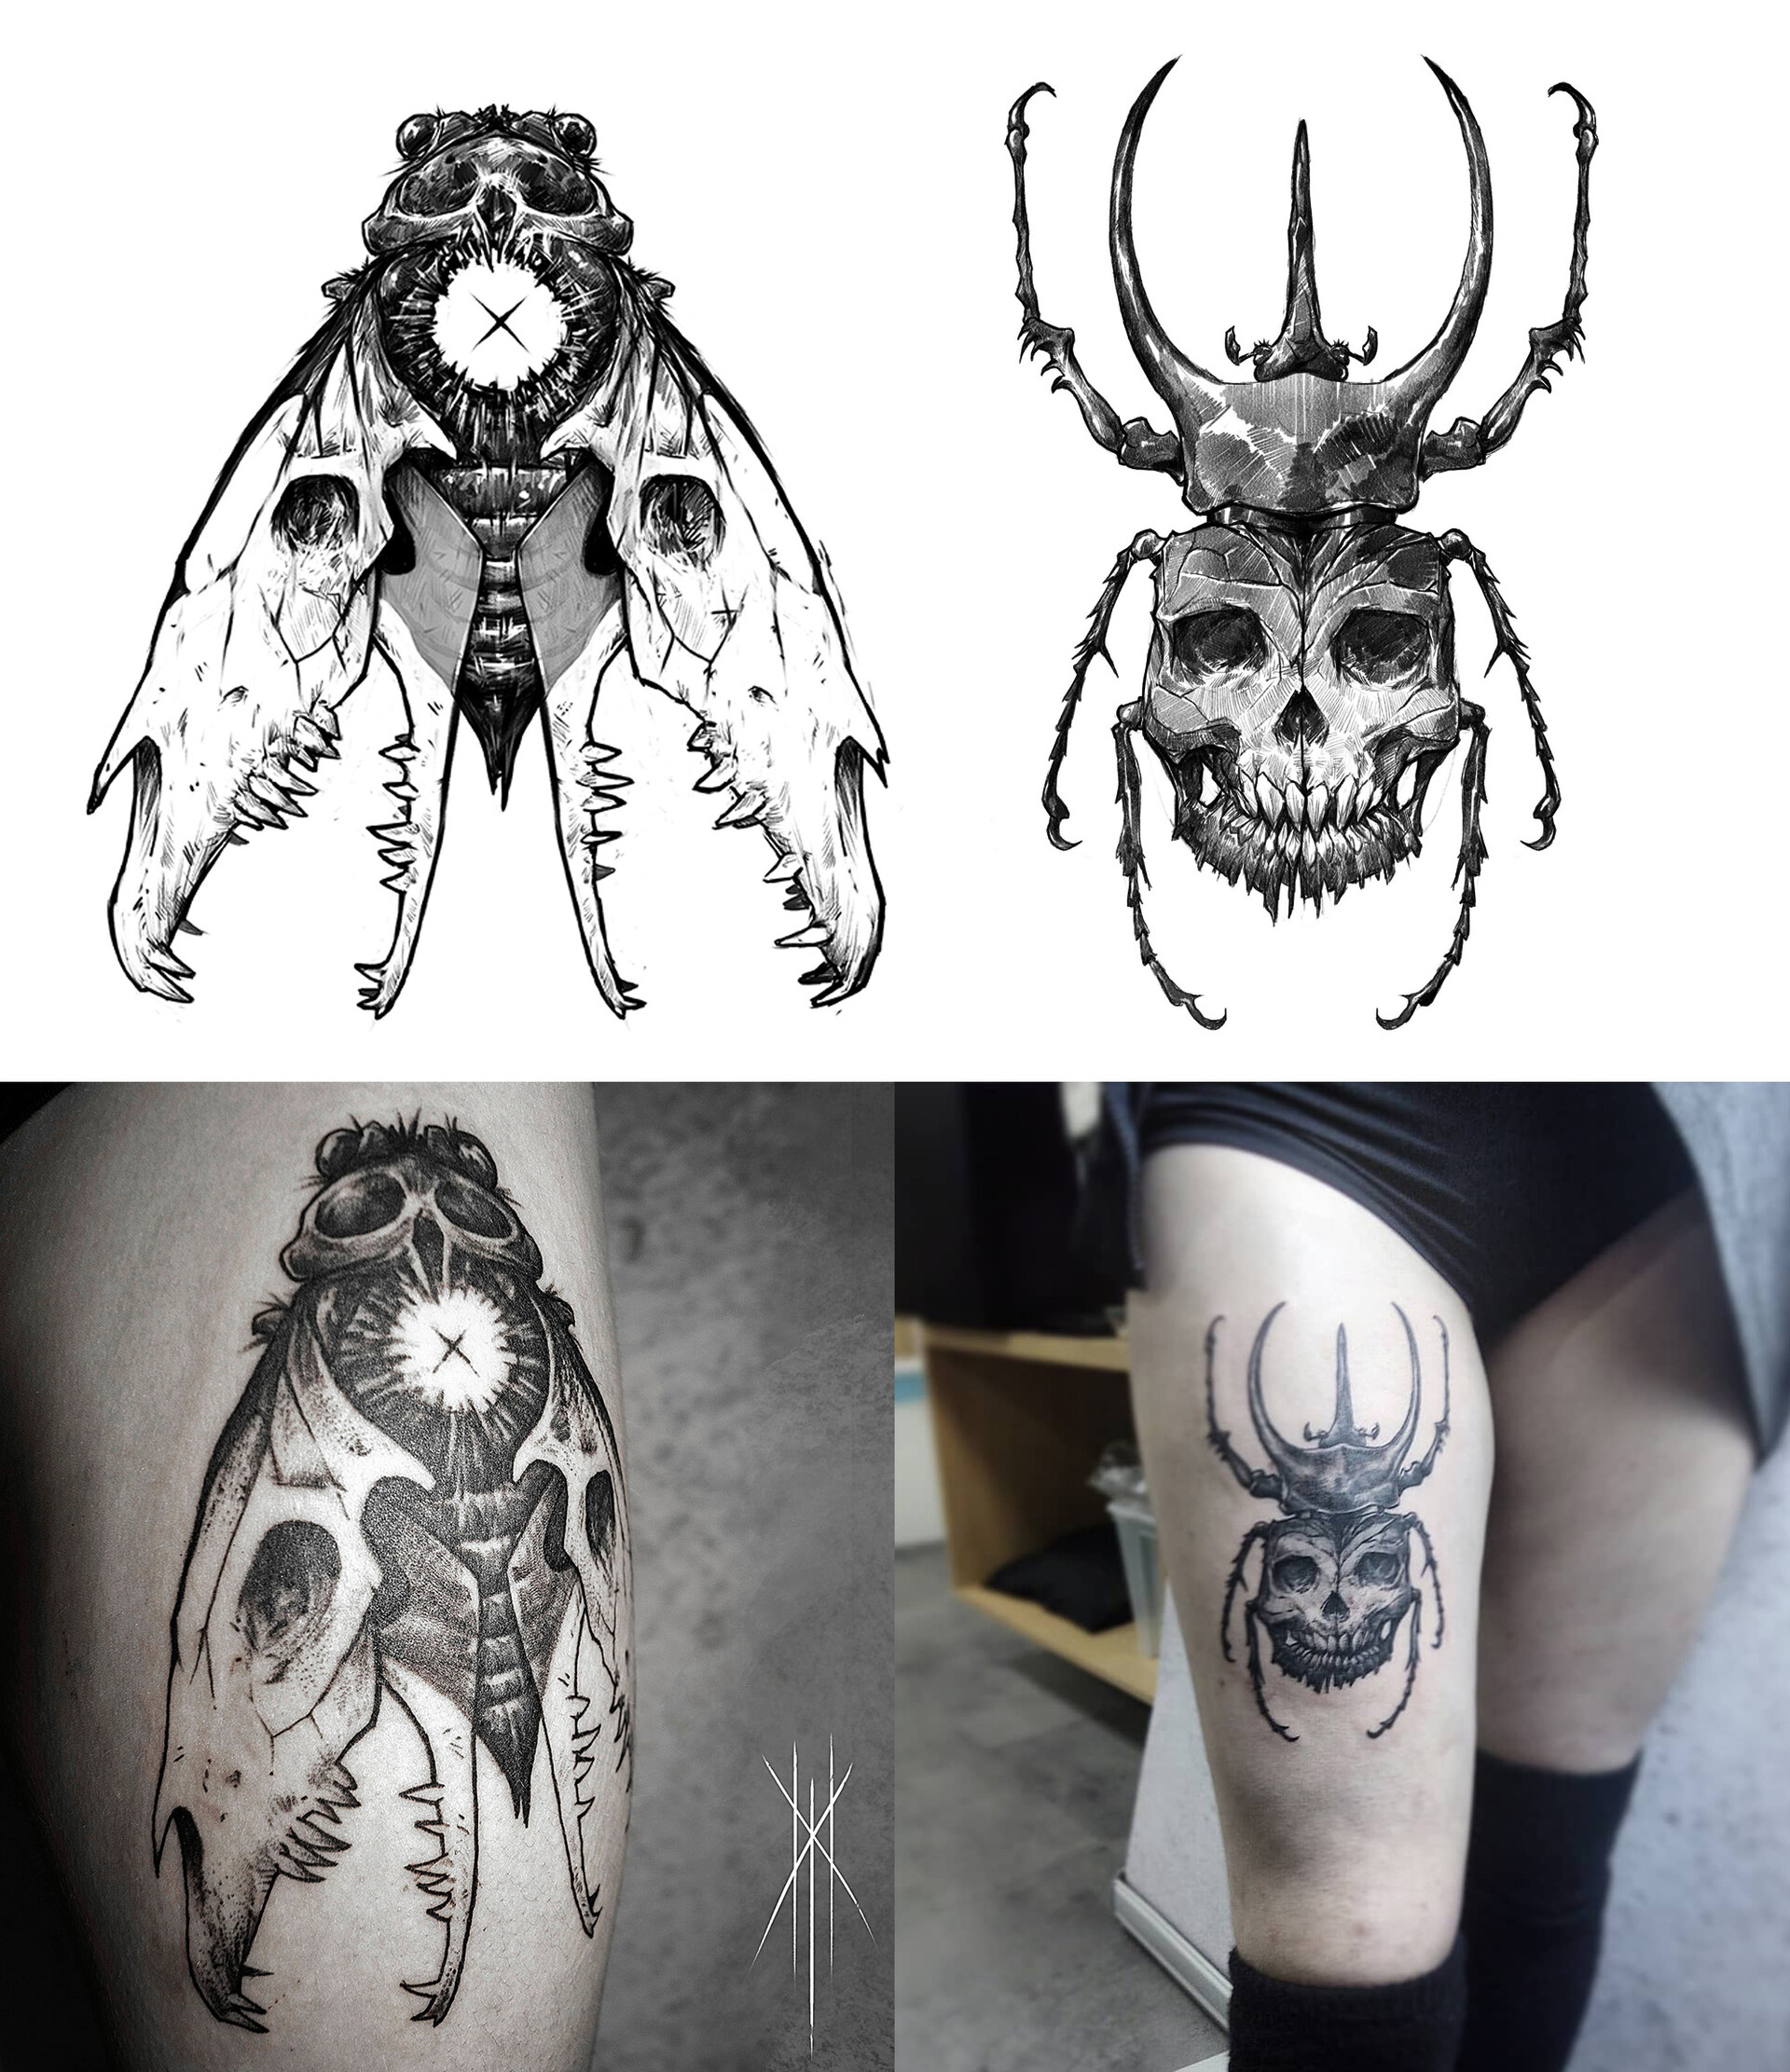 ArtStation - Tattoo Designs and Sketches